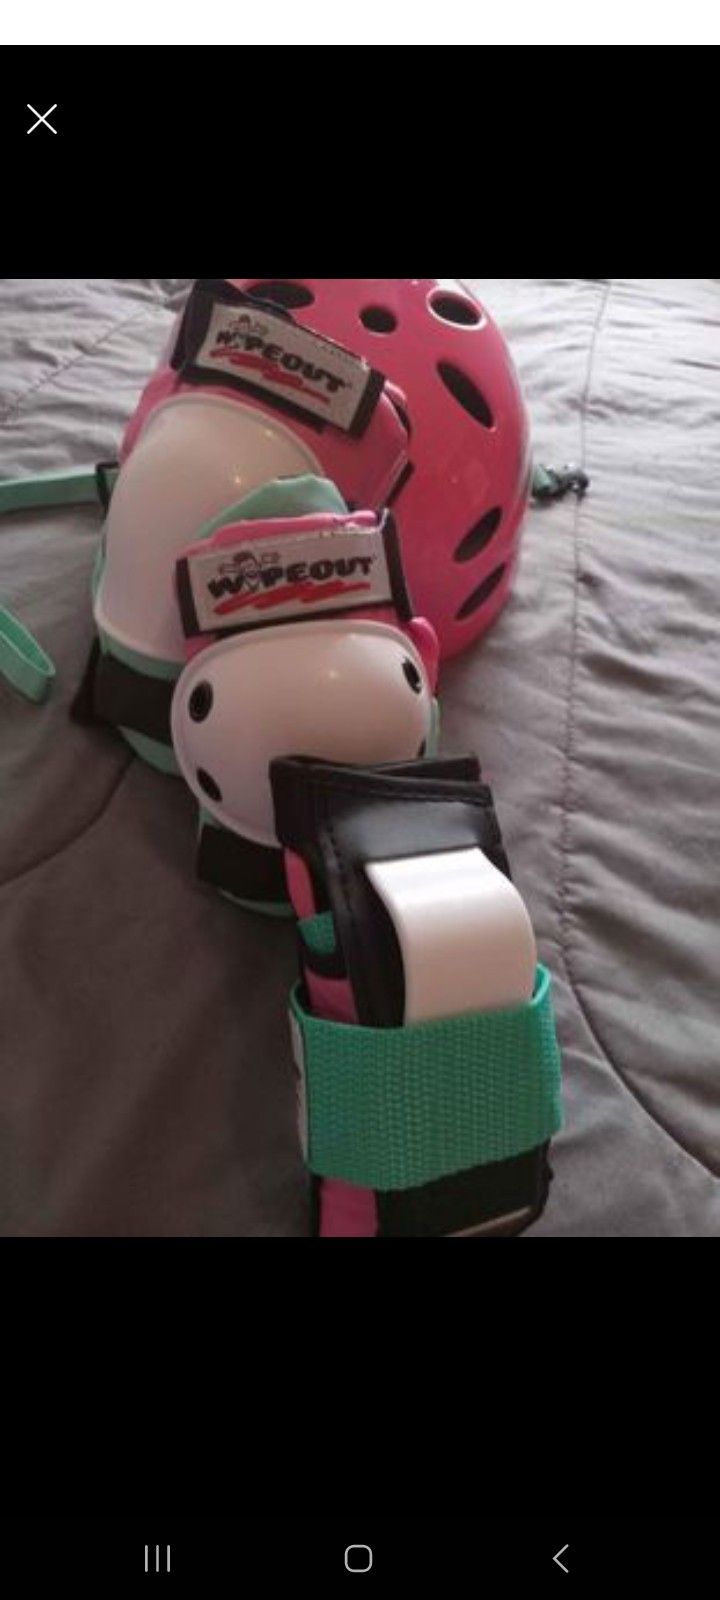 Wipeout 3-pack includes wrist guards, knee pads, and elbow pads  with helmet